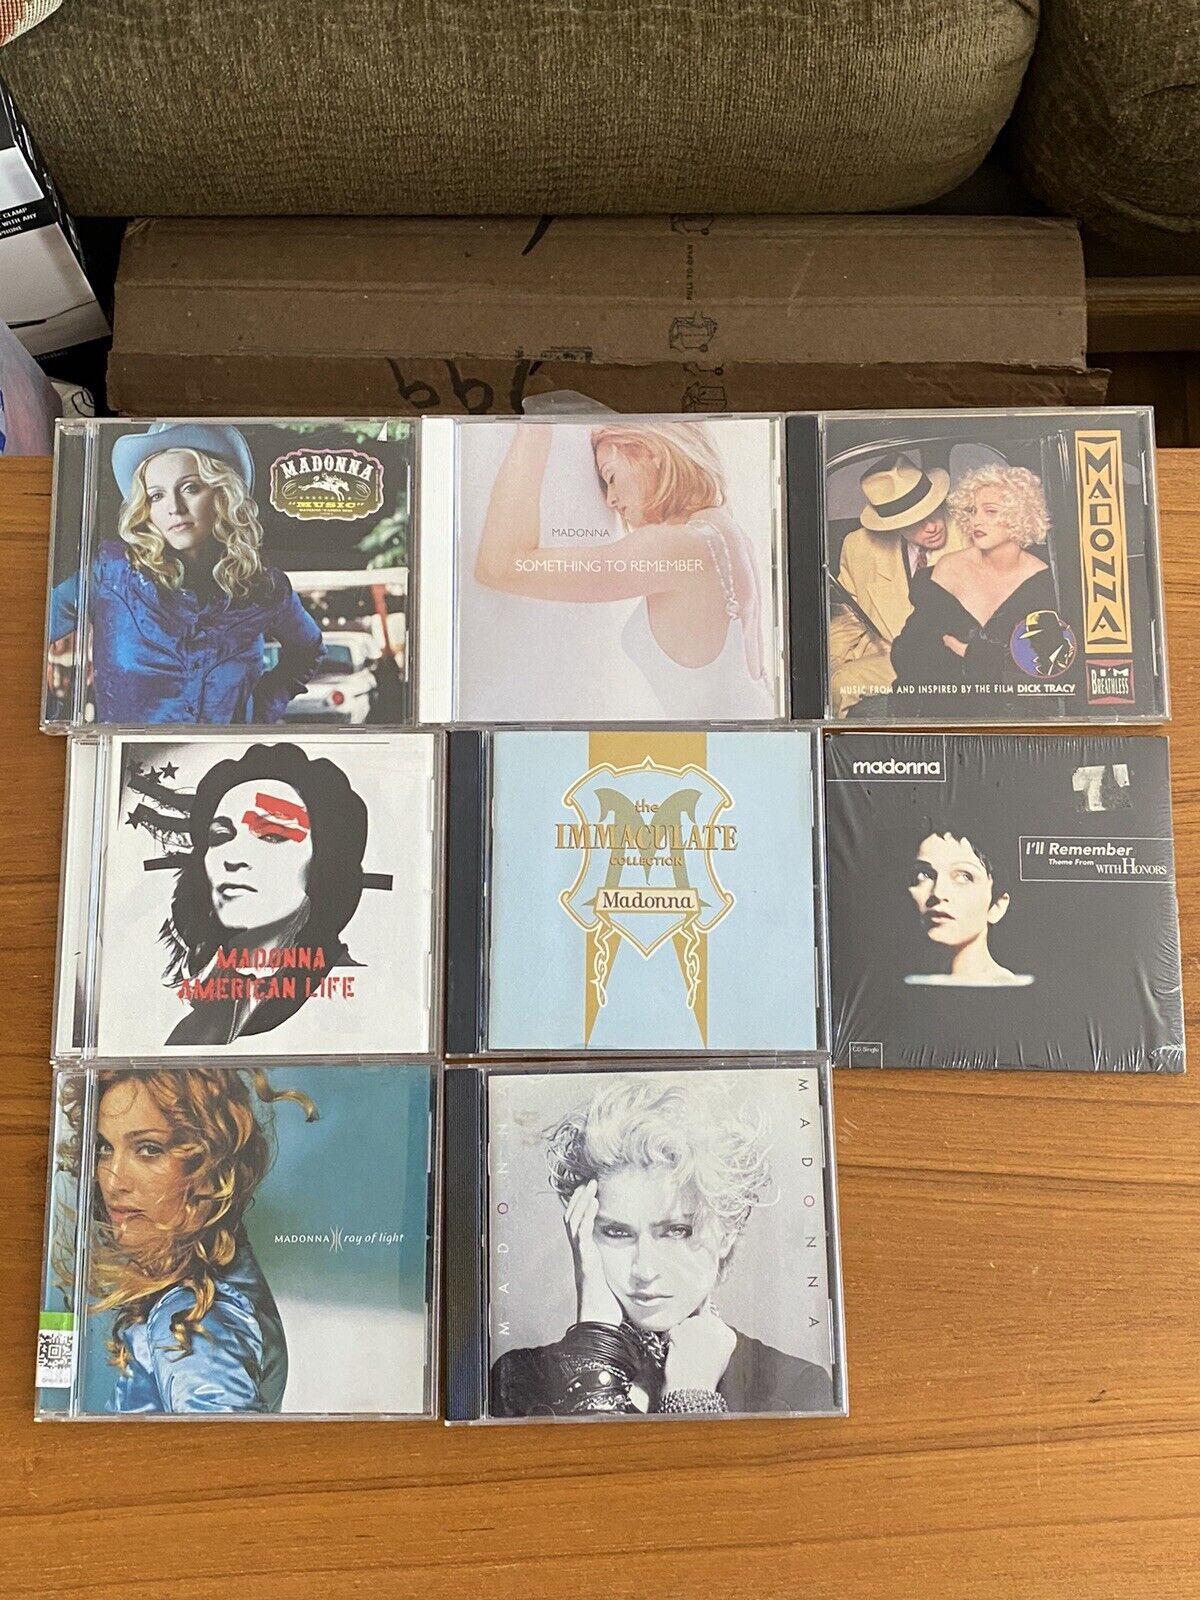 Madonna Lot Of 8 CDs: Music, American Life, Immaculate +5 More